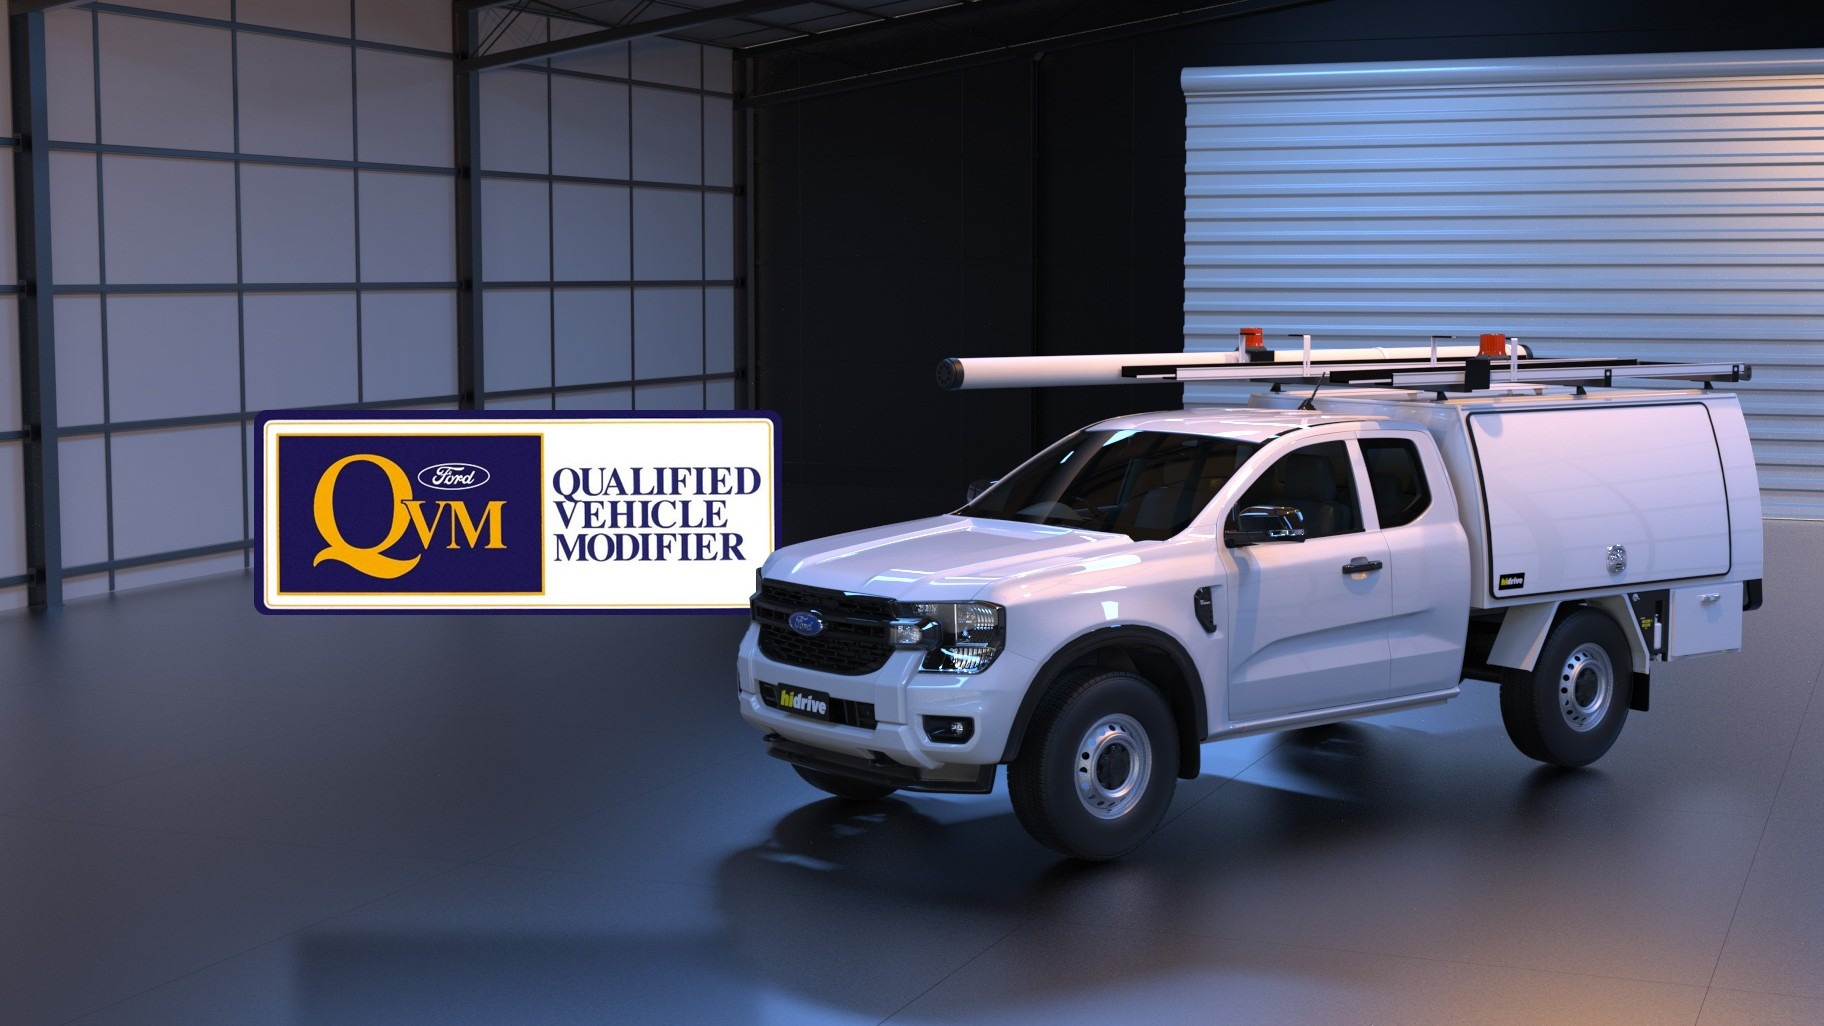 Hidrive Sydney, Ford Certified QVM With Over 30 Yrs Of Ranger Ute Canopies Exp